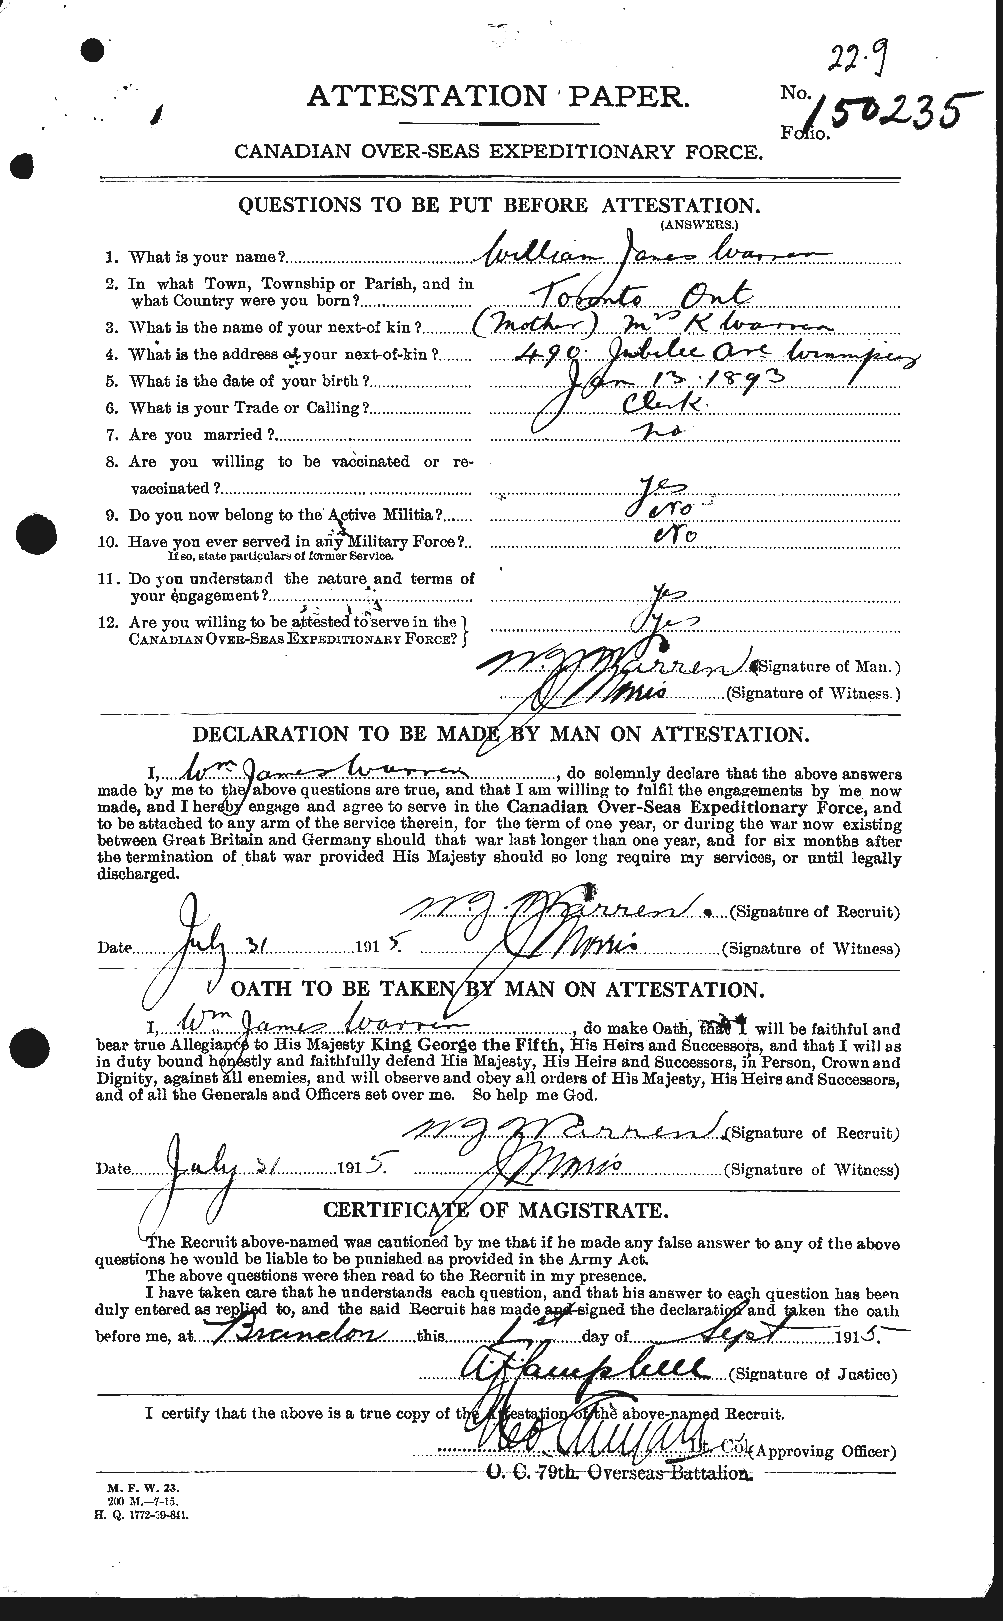 Personnel Records of the First World War - CEF 658691a